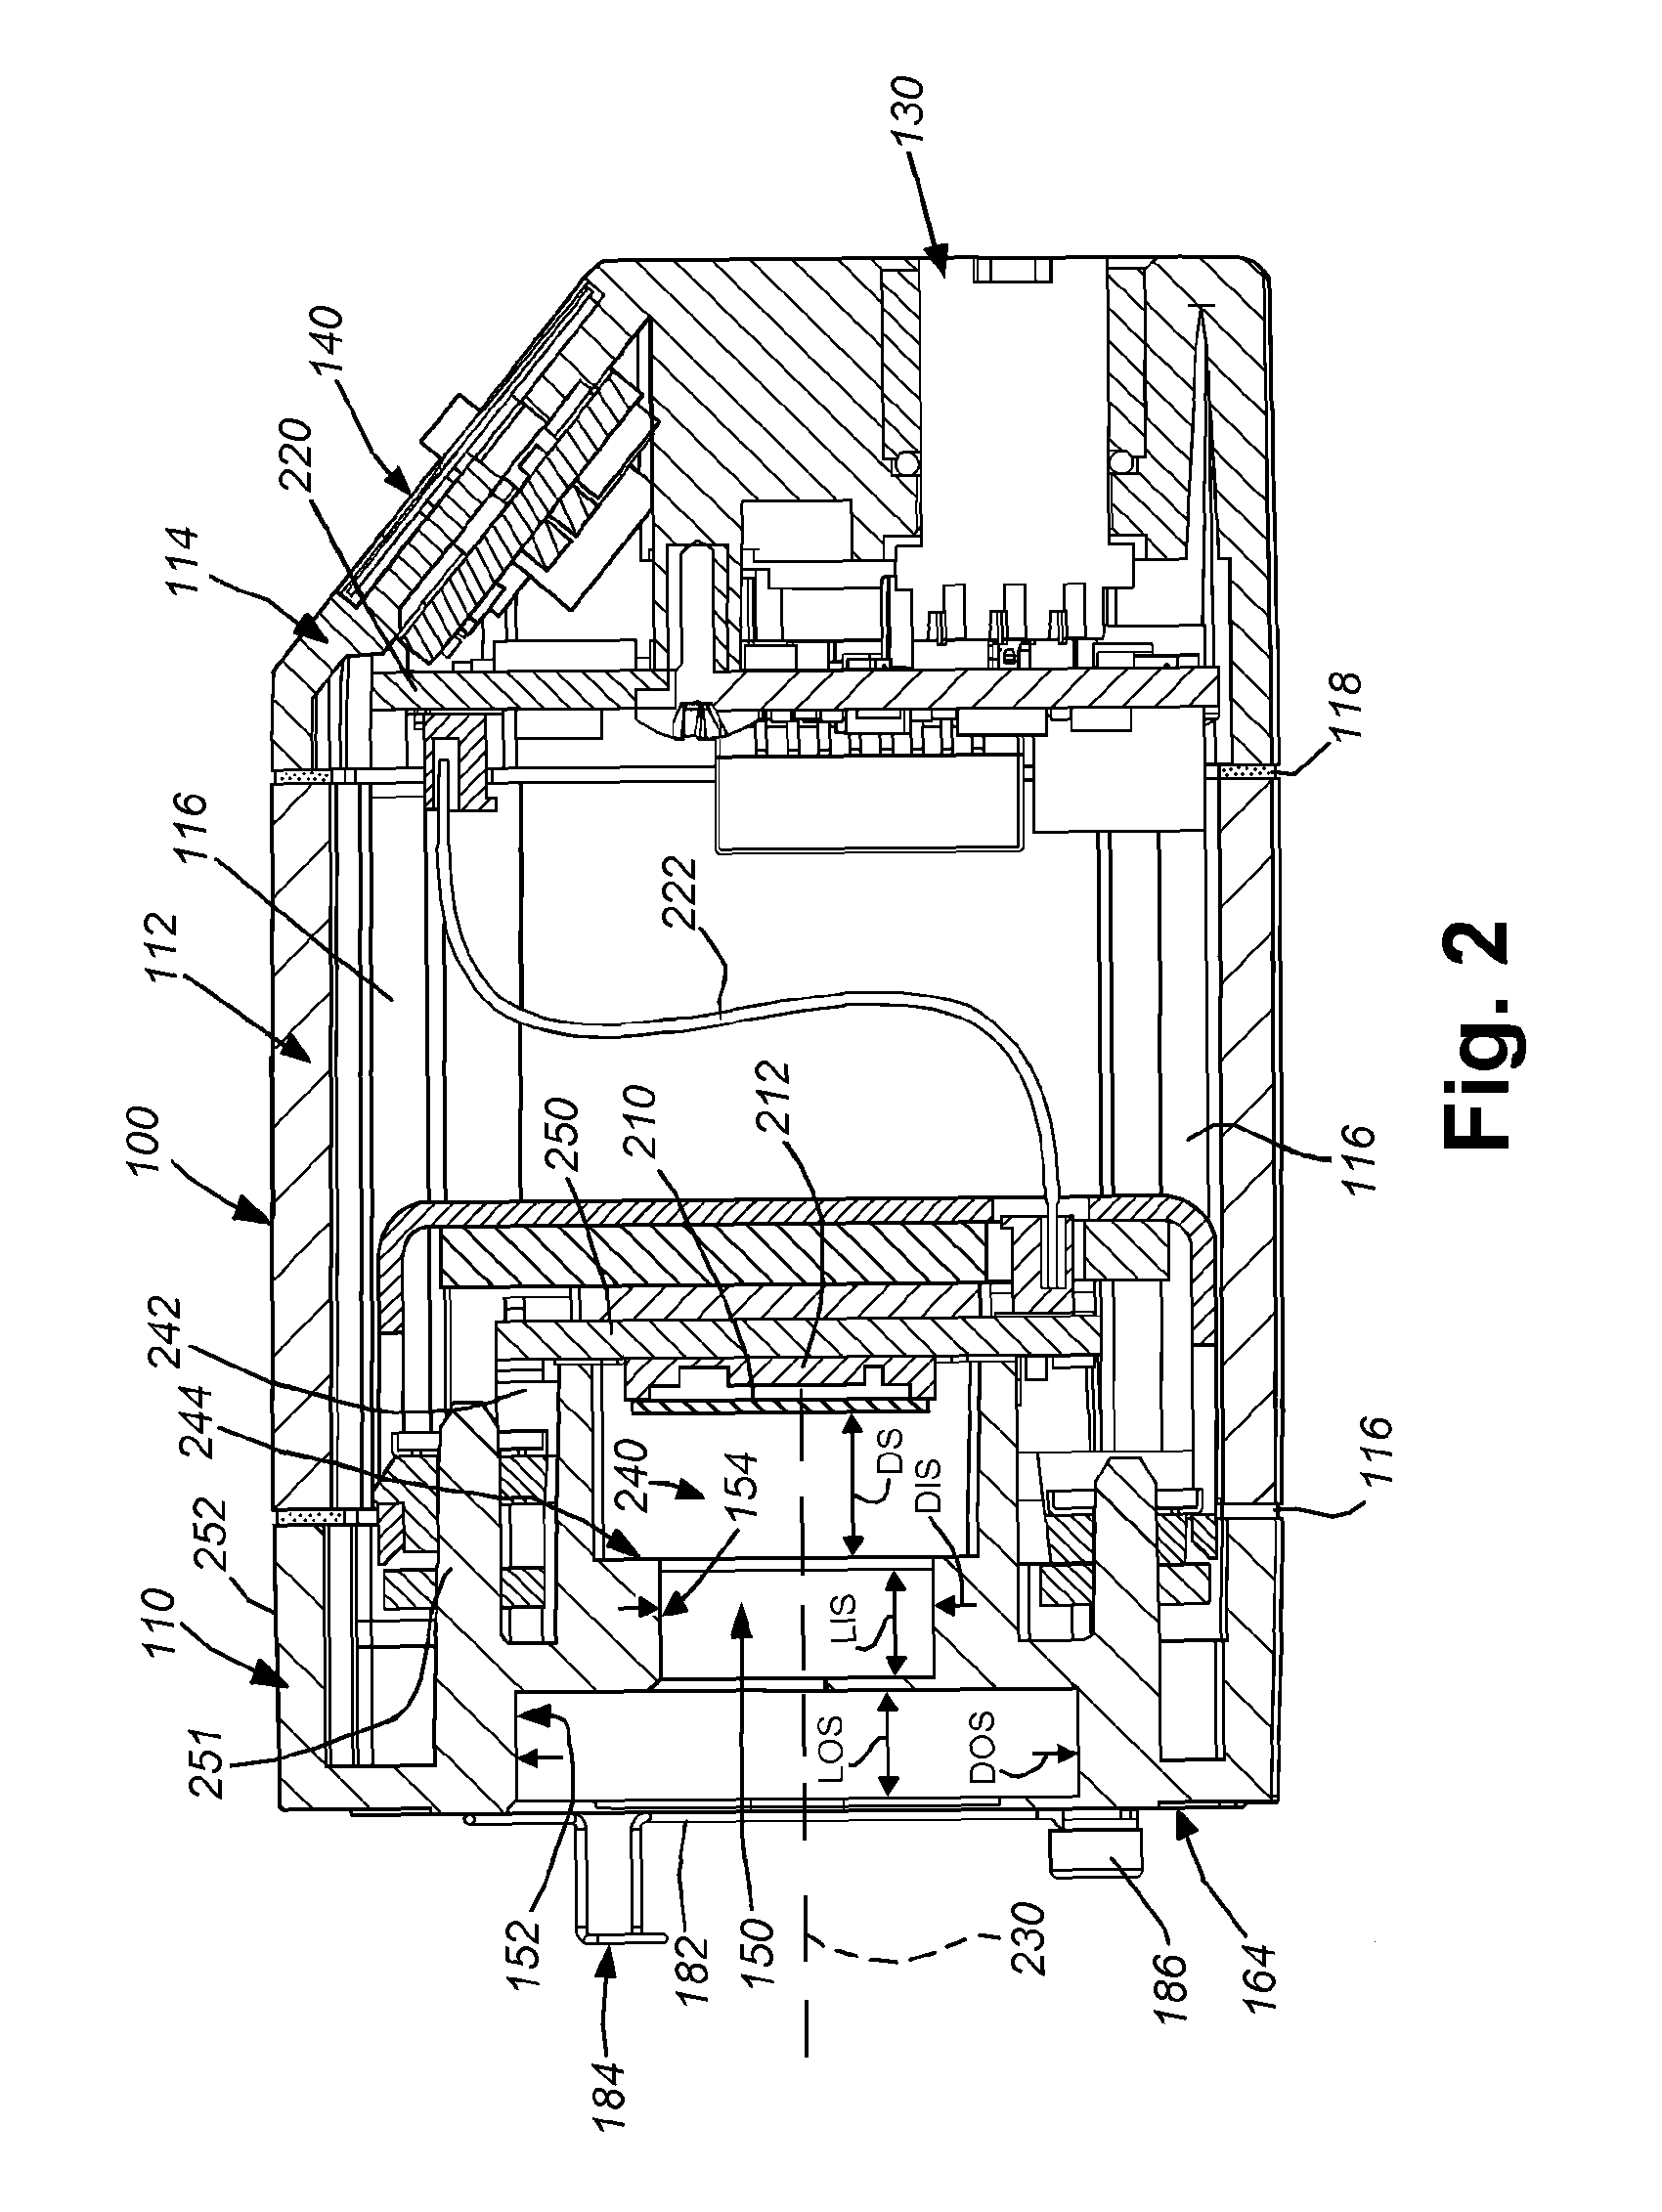 Vision system camera with mount for multiple lens types